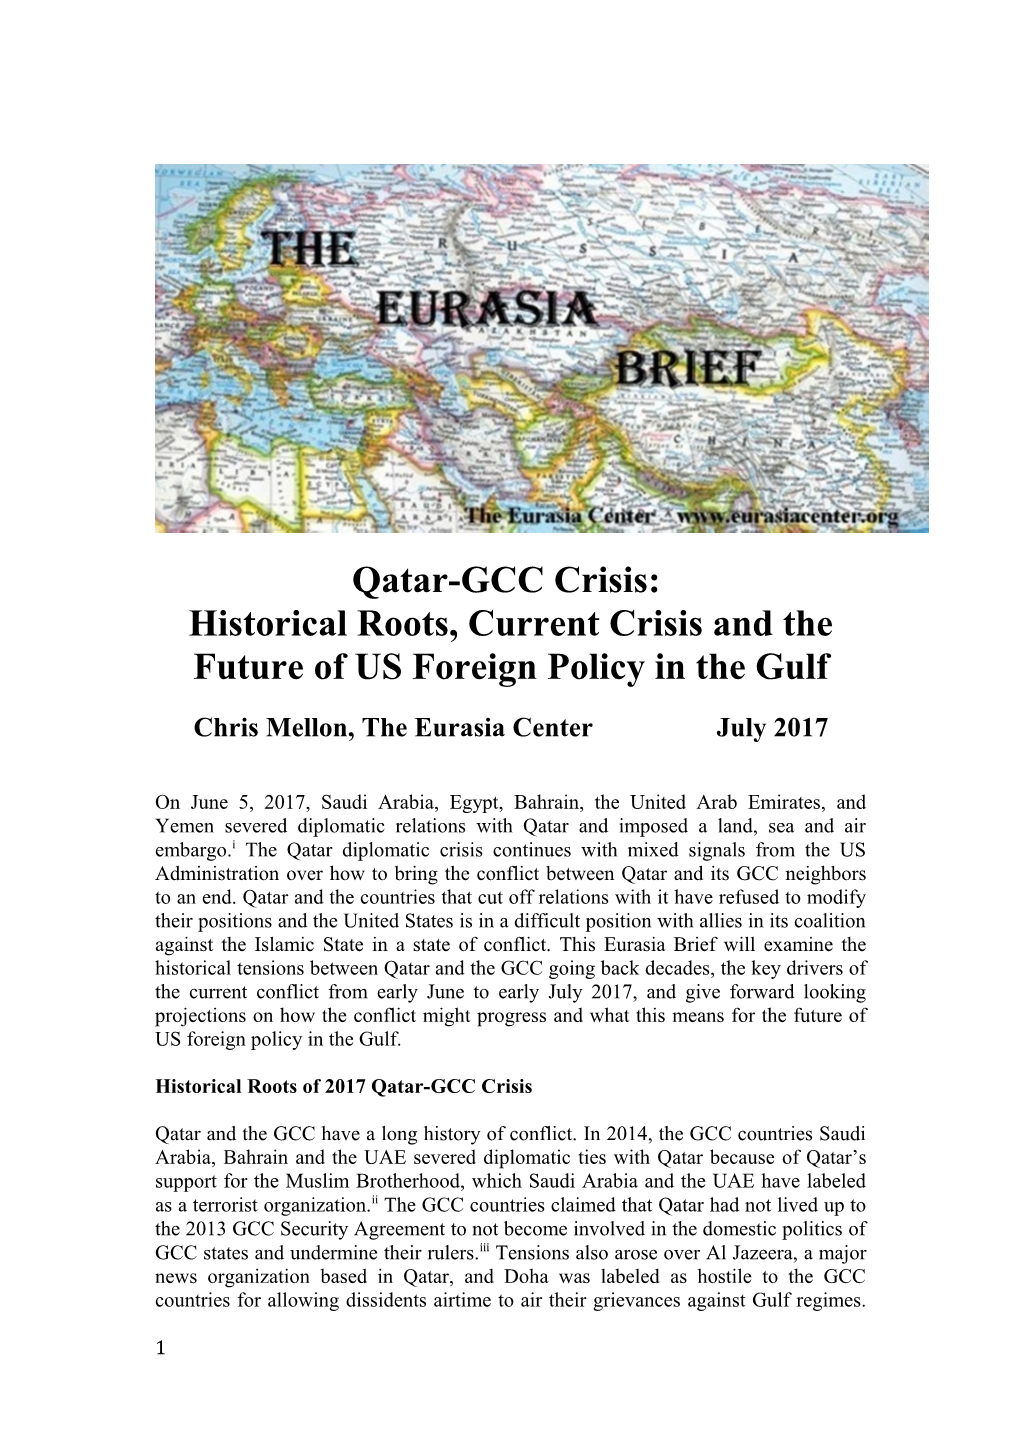 Historical Roots, Current Crisis and the Future of US Foreign Policy in the Gulf